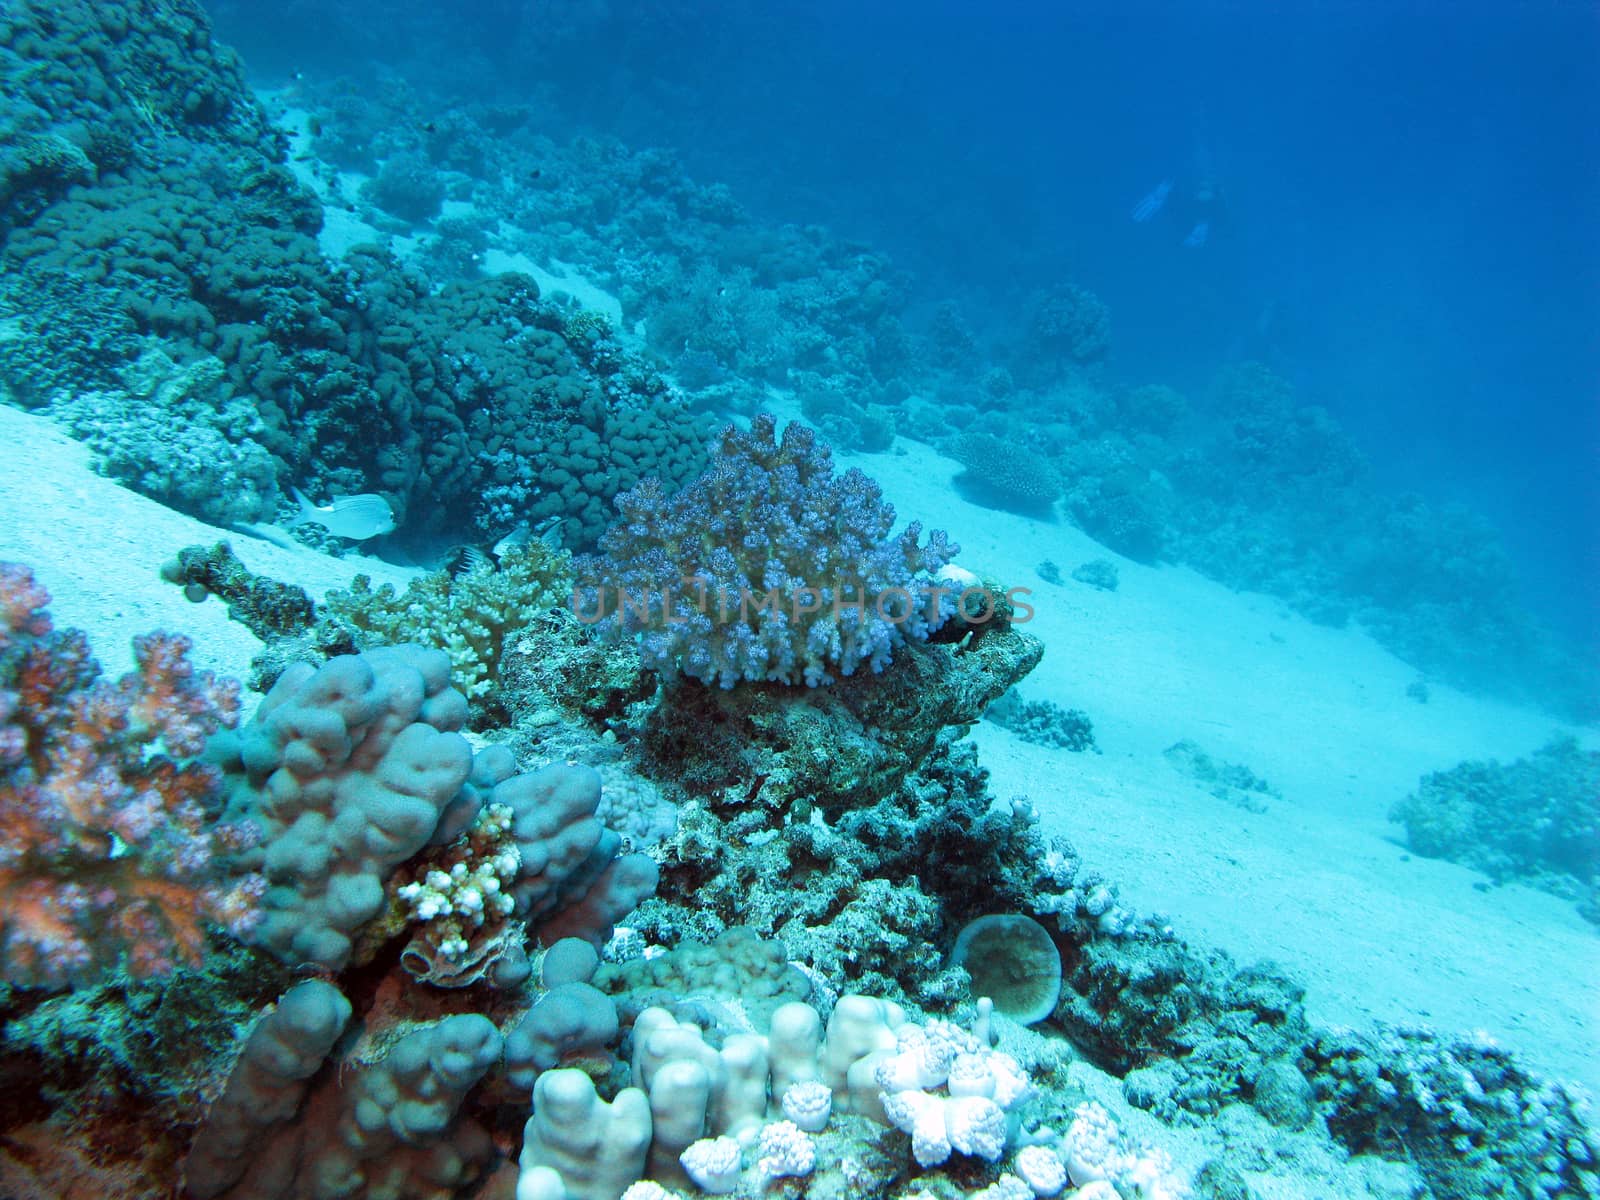 bottom of tropical sea with coral reef on great depth on blue water background